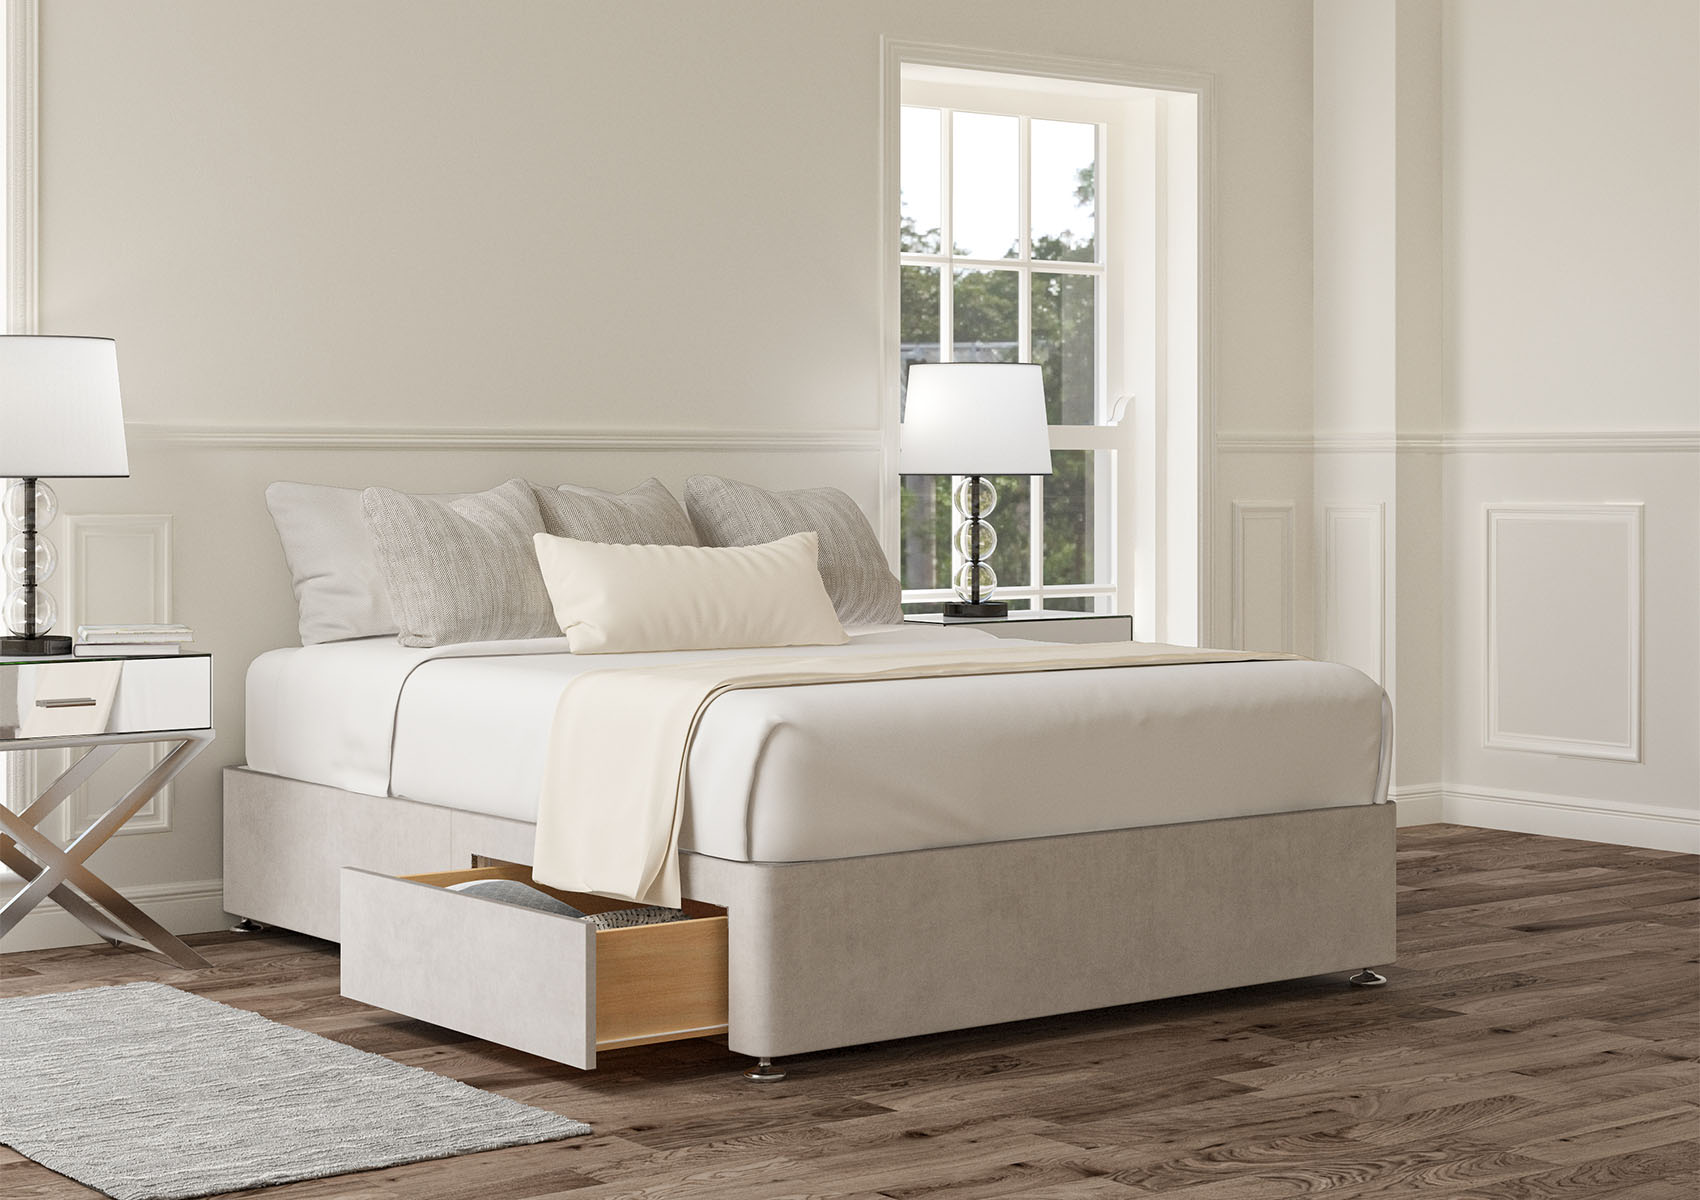 View 2 Naples Cream Upholstered Super King Storage Bed Time4Sleep information